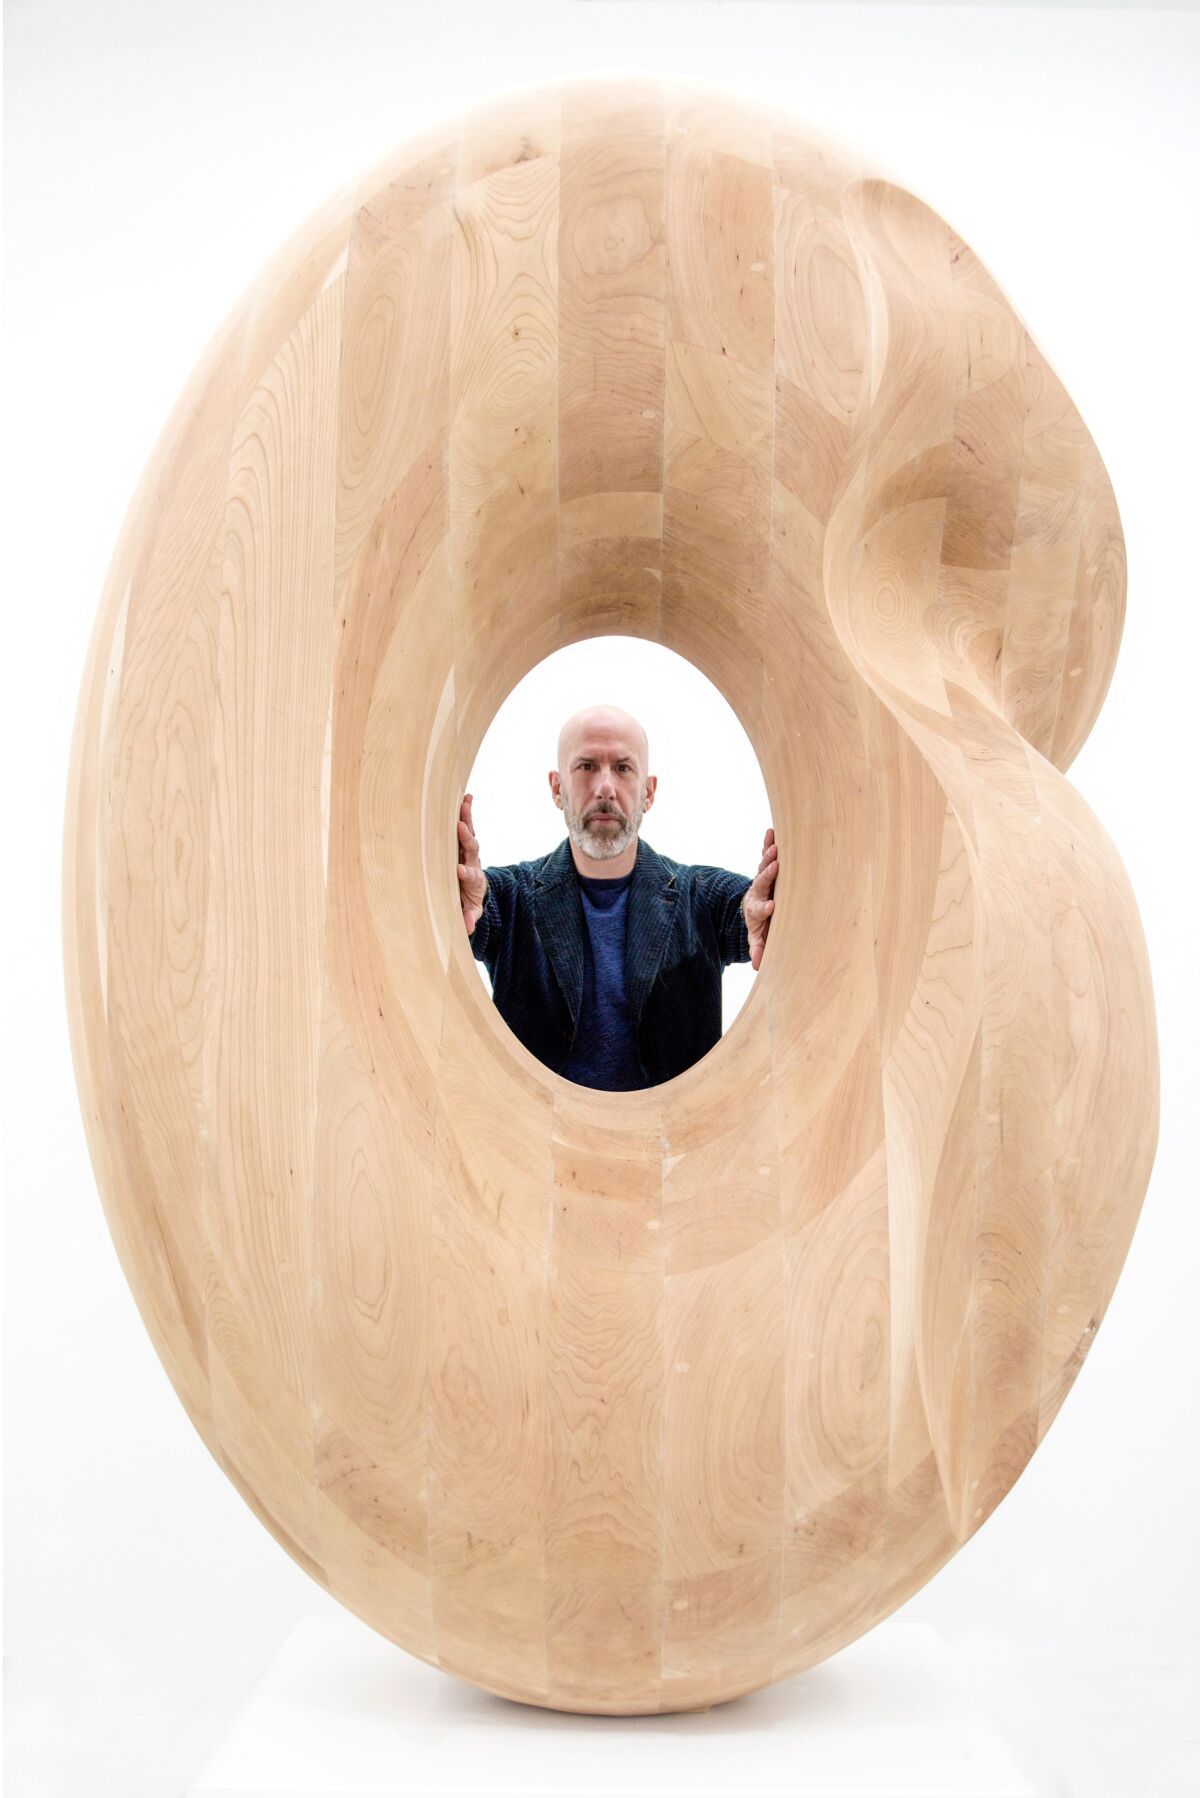 Artist Douglas Tausik Ryder with one of his large-scale sculptures.